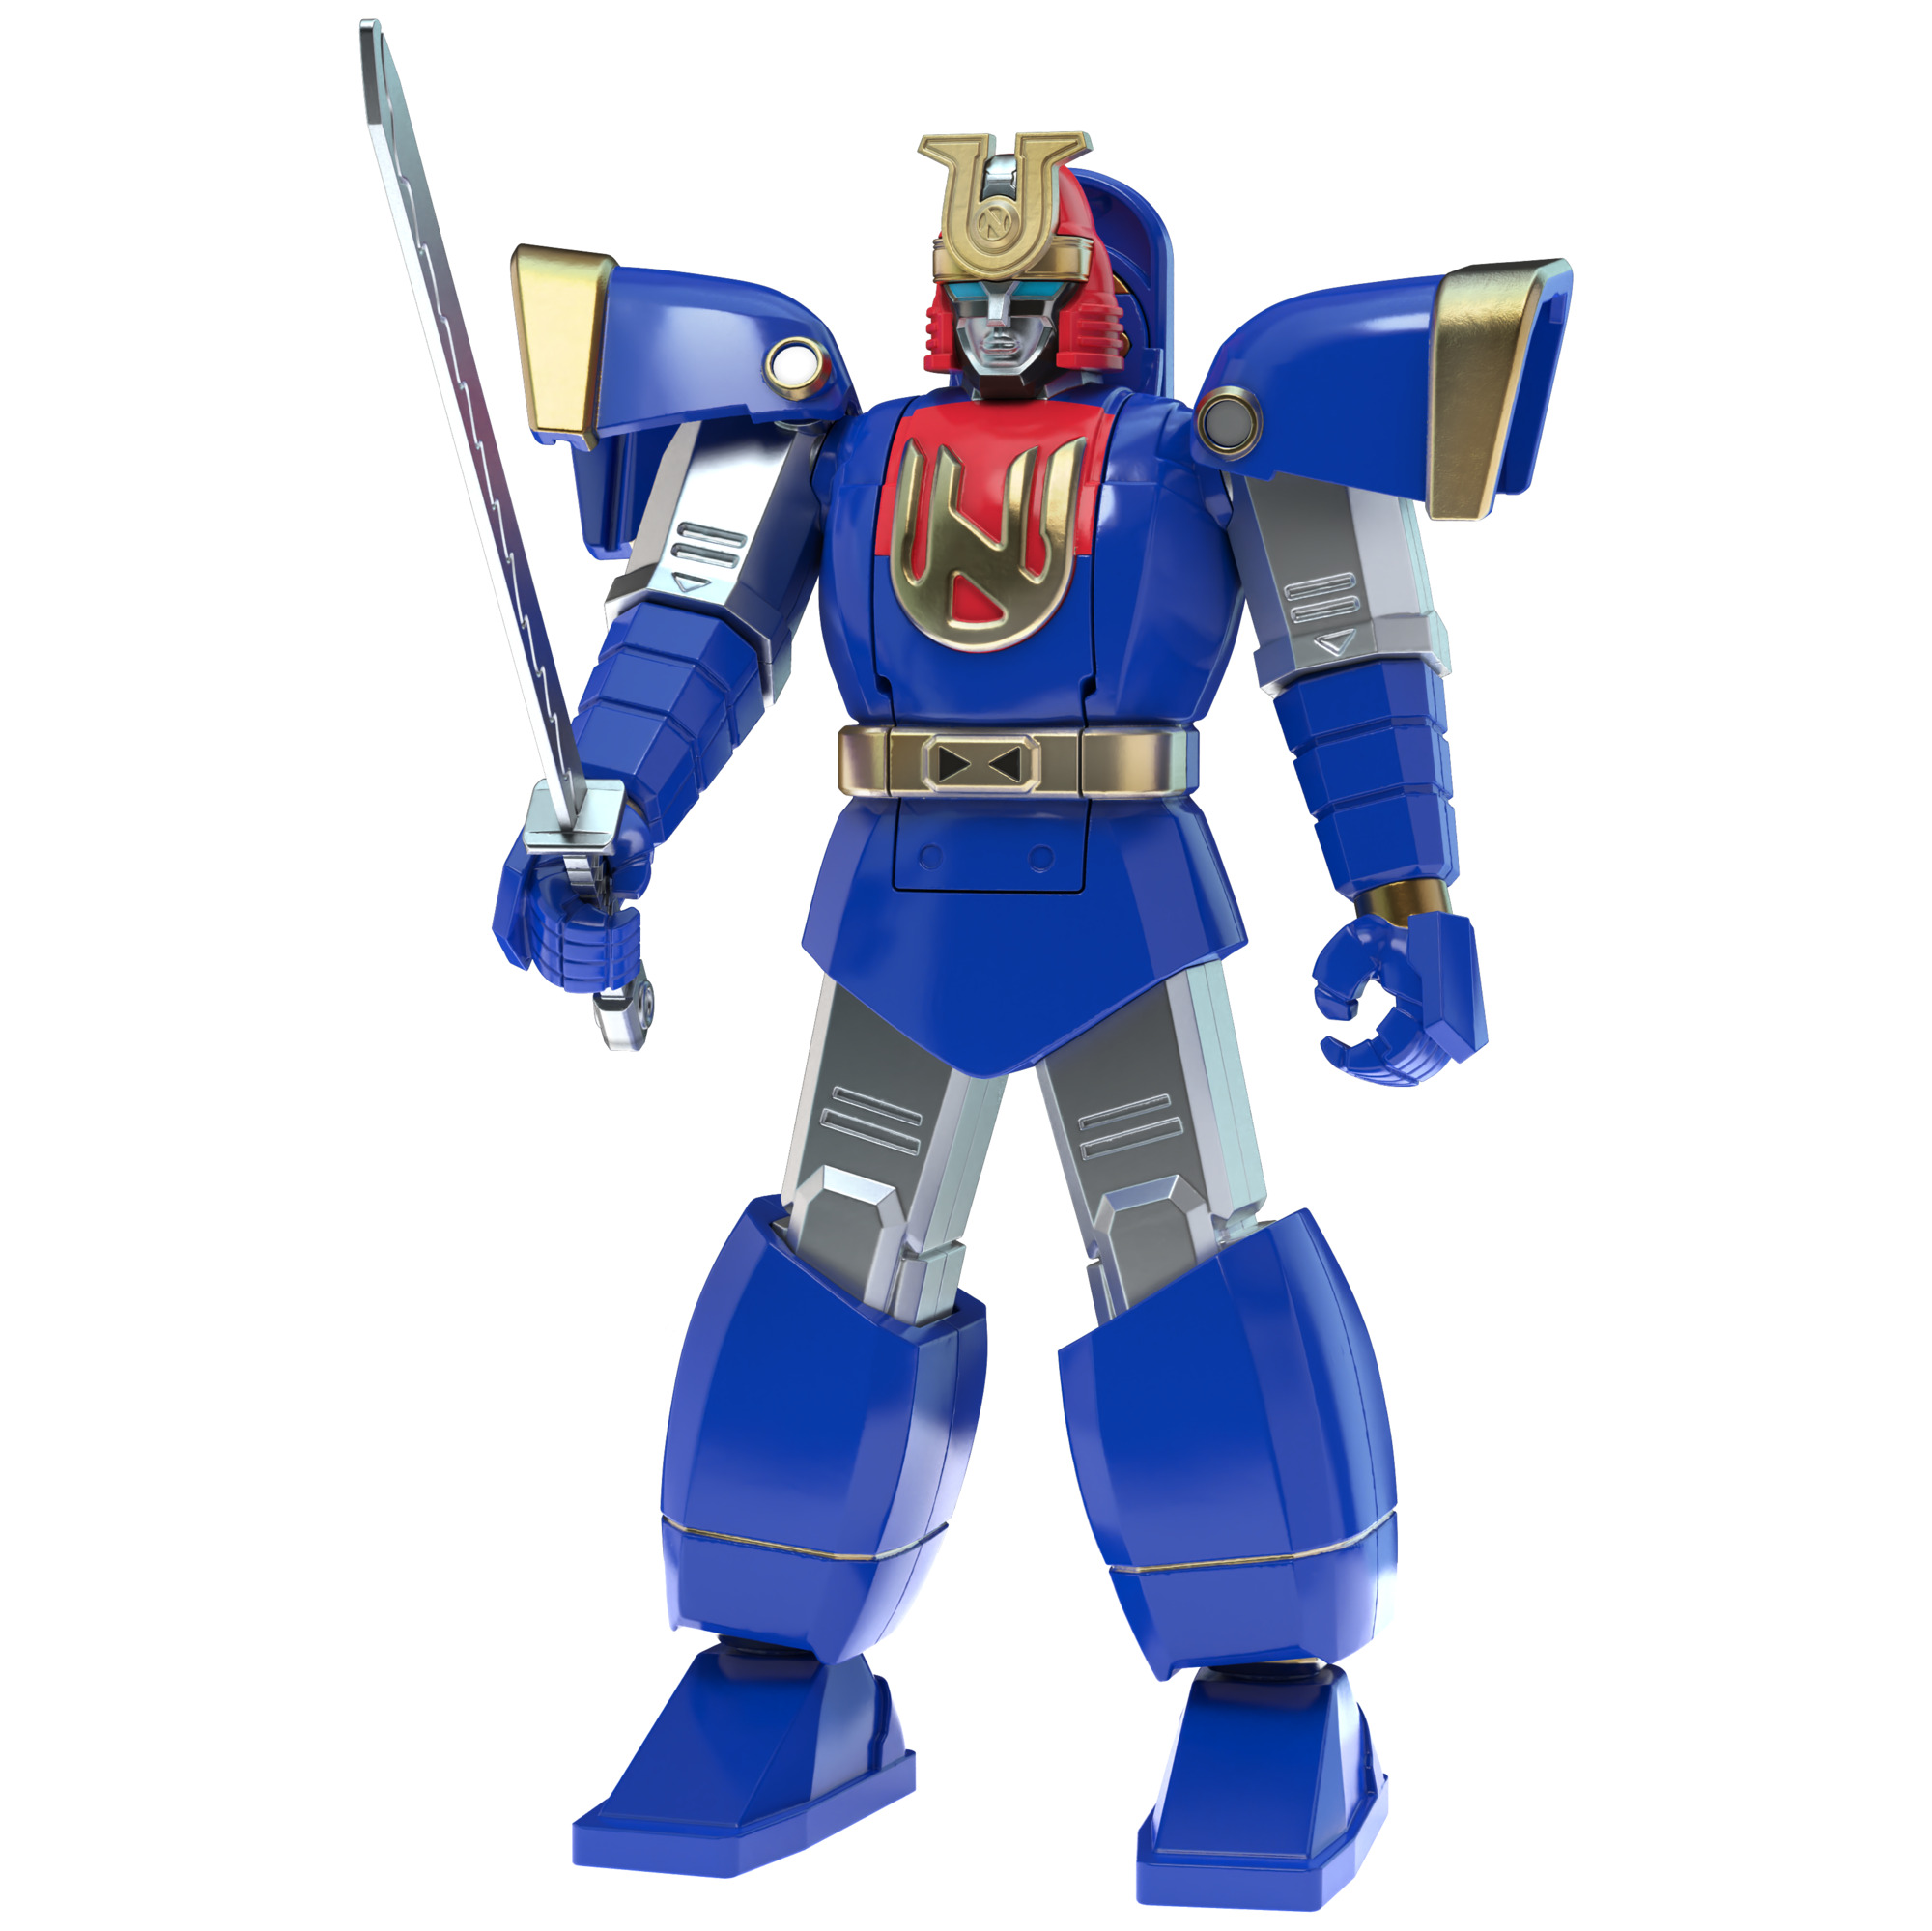 Power Rangers: Mighty Morphin Retro-Morphin Ninjor Toy Action Figure for Boys and Girls Ages 4 5 6 7 8 and Up (6”) - image 3 of 4